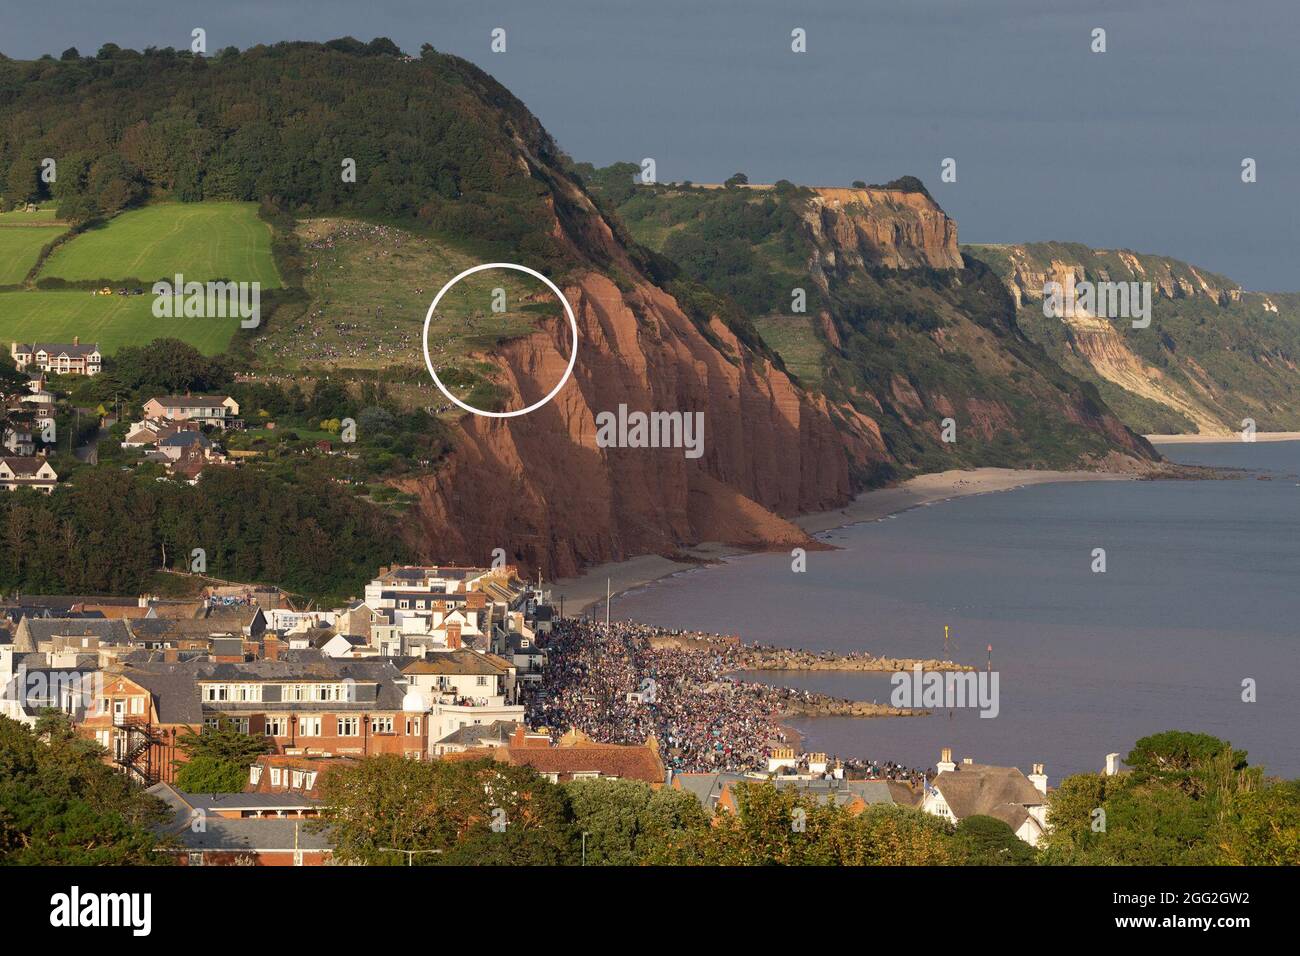 Sidmouth, Devon, UK. 27th Aug 2021.  Members of the public stand dangerously close to the edge of crumbling cliffs whilst watching the RAF Red Arrows perform a colourful display over Sidmouth, Devon. The cliffs at Sidmouth have collapsed in this location around half a dozen times in the past 4-6 weeks. Note: White circle indicates location where public were viewing the display. Credit: Ian Williams/Alamy Live News Stock Photo